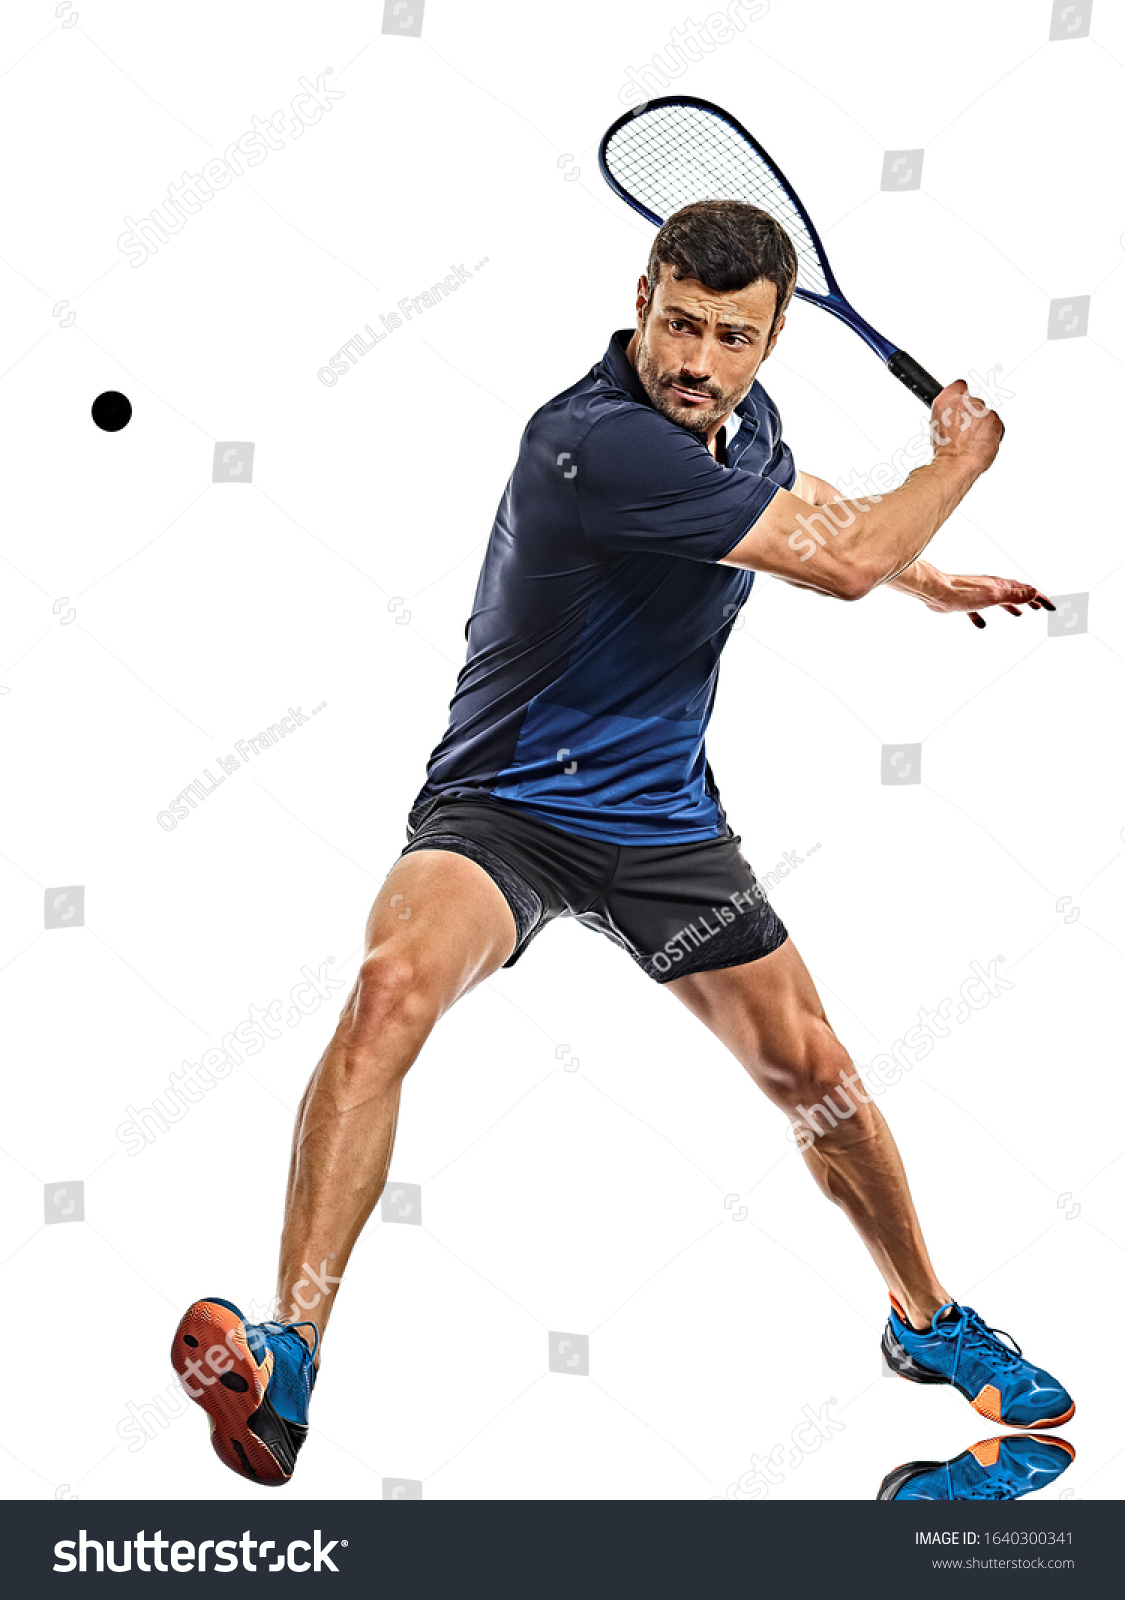 one caucasian mature man practicing squash player in studio isolated on white background #1640300341